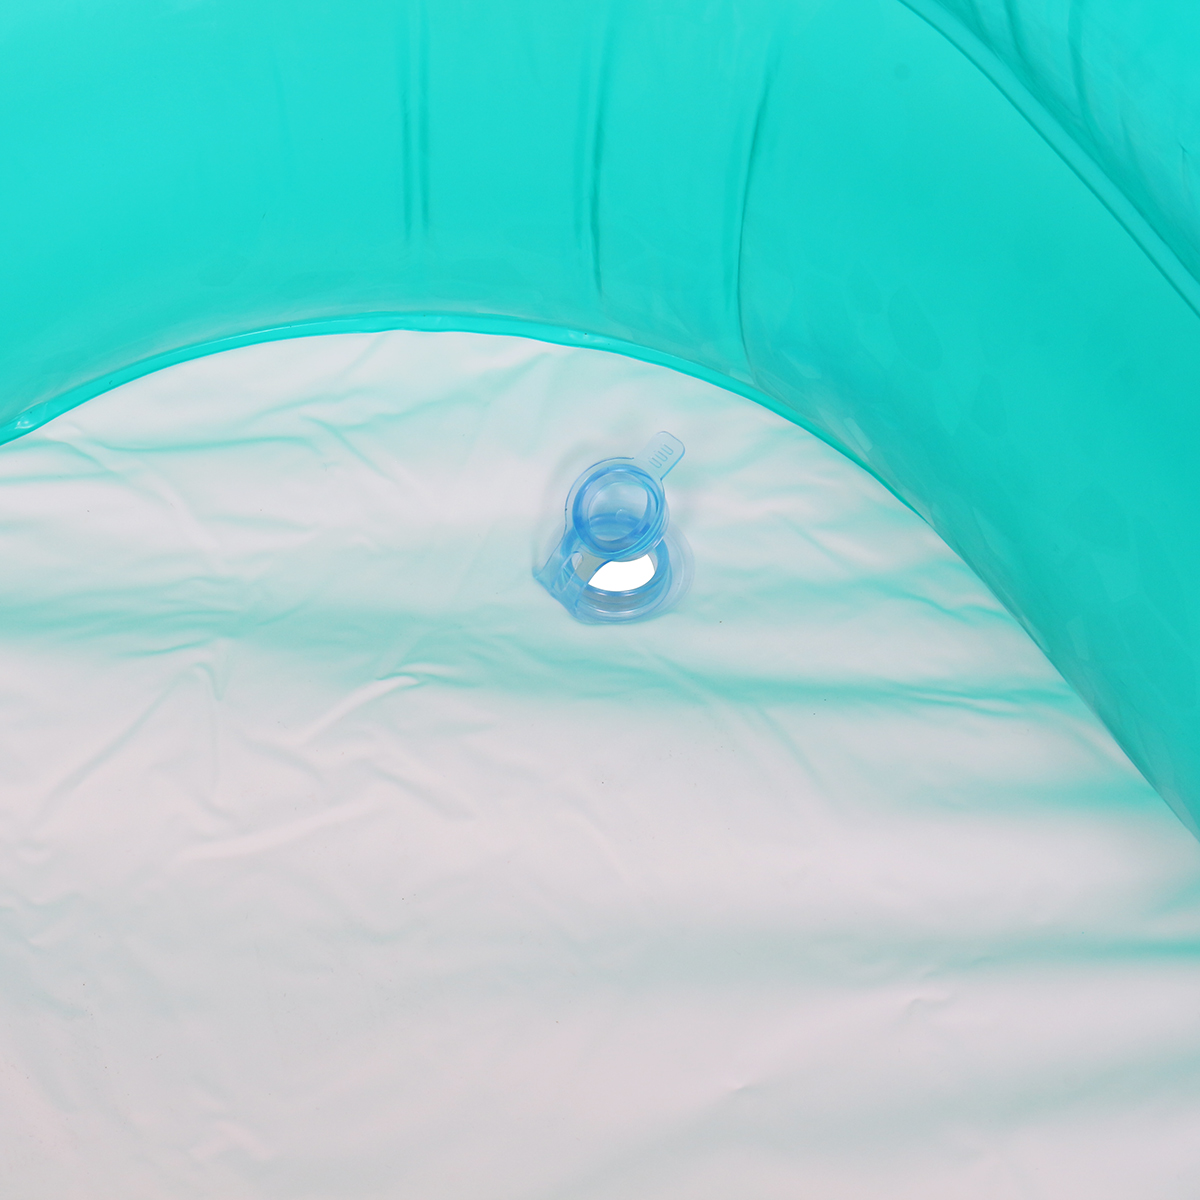 181-x-130CM-Inflatable-Swimming-Pool-Children-Adults--Summer-Bathing-Tub-Baby-Home-Use-Inflatable-Pa-1692685-7